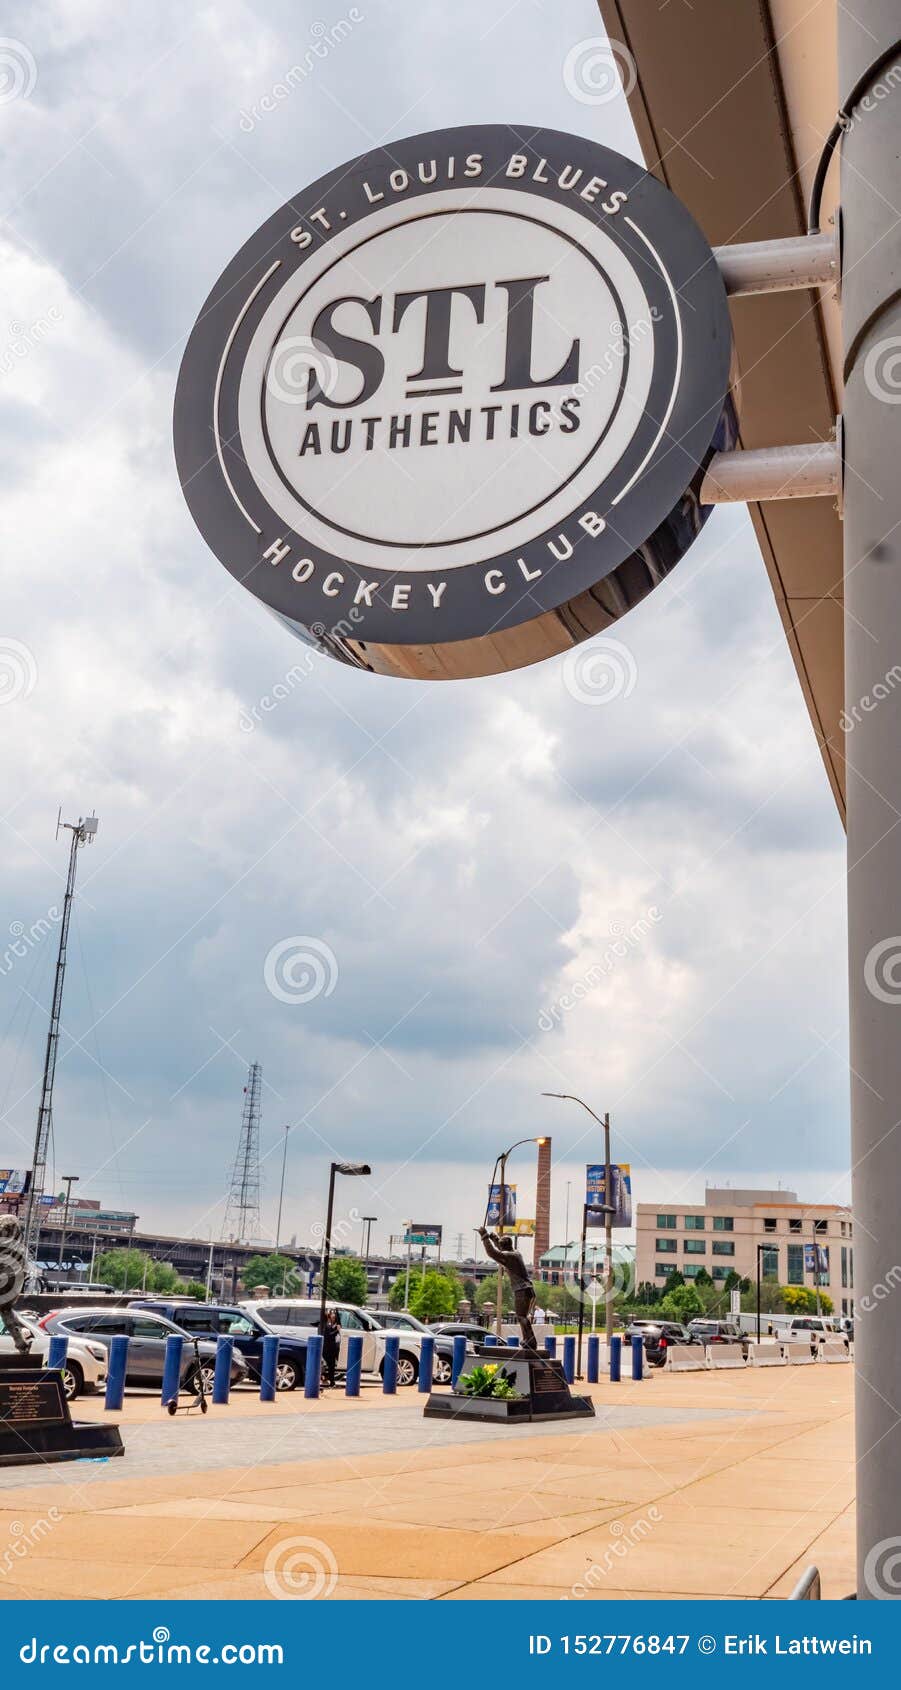 St Louis Blues Hockey Club - ST. LOUIS, USA - JUNE 19, 2019 Editorial Photography - Image of ...